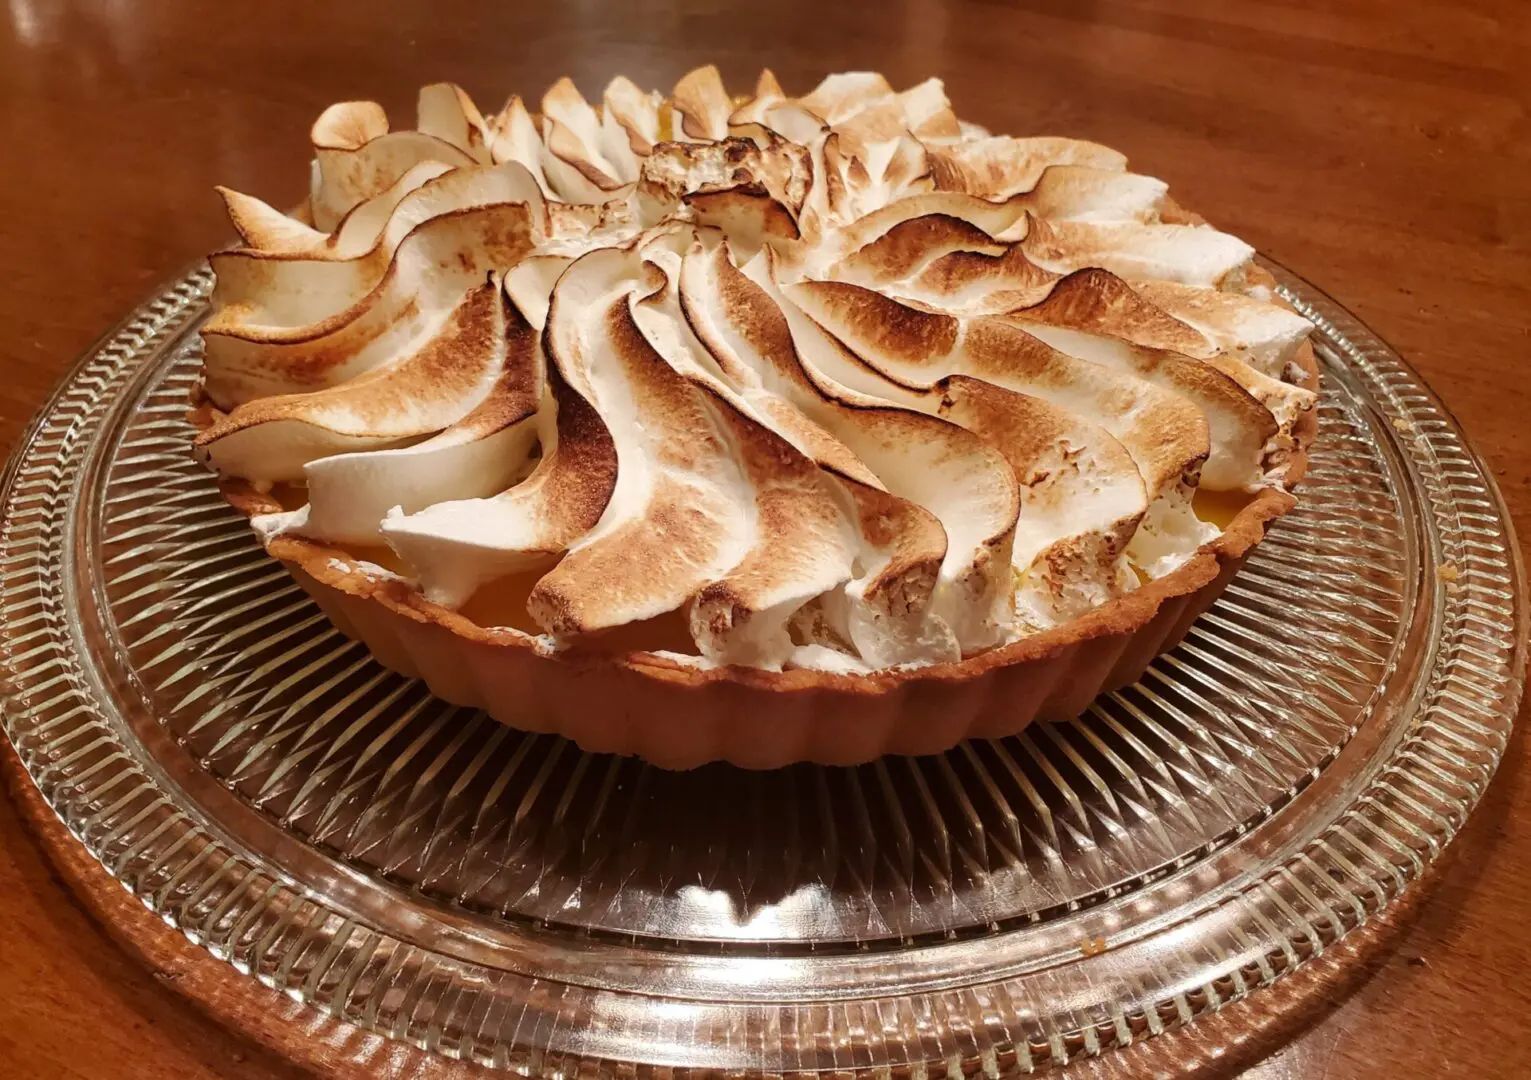 A meringue pie on a glass plate, featured in The Friday Baking Project blog.